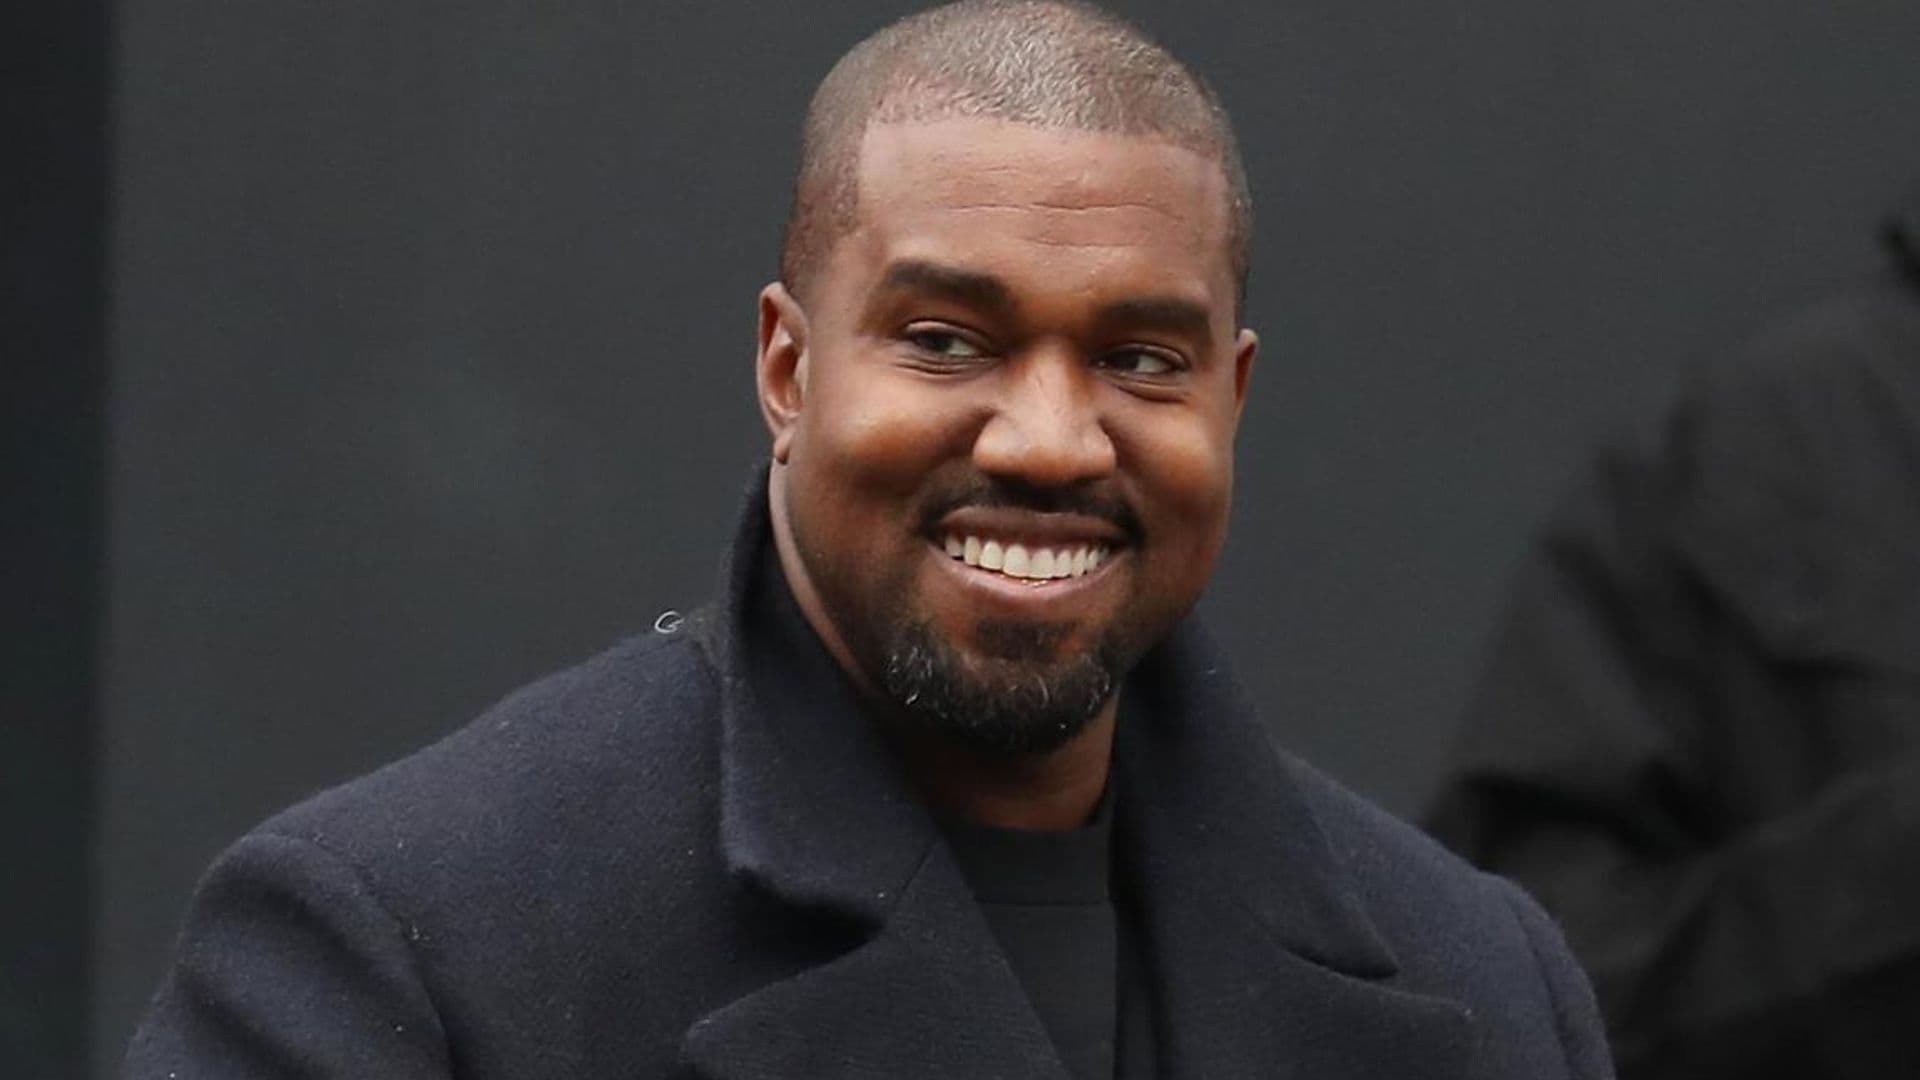 Kanye West will be on ‘Jimmy Kimmel Live!’ post election